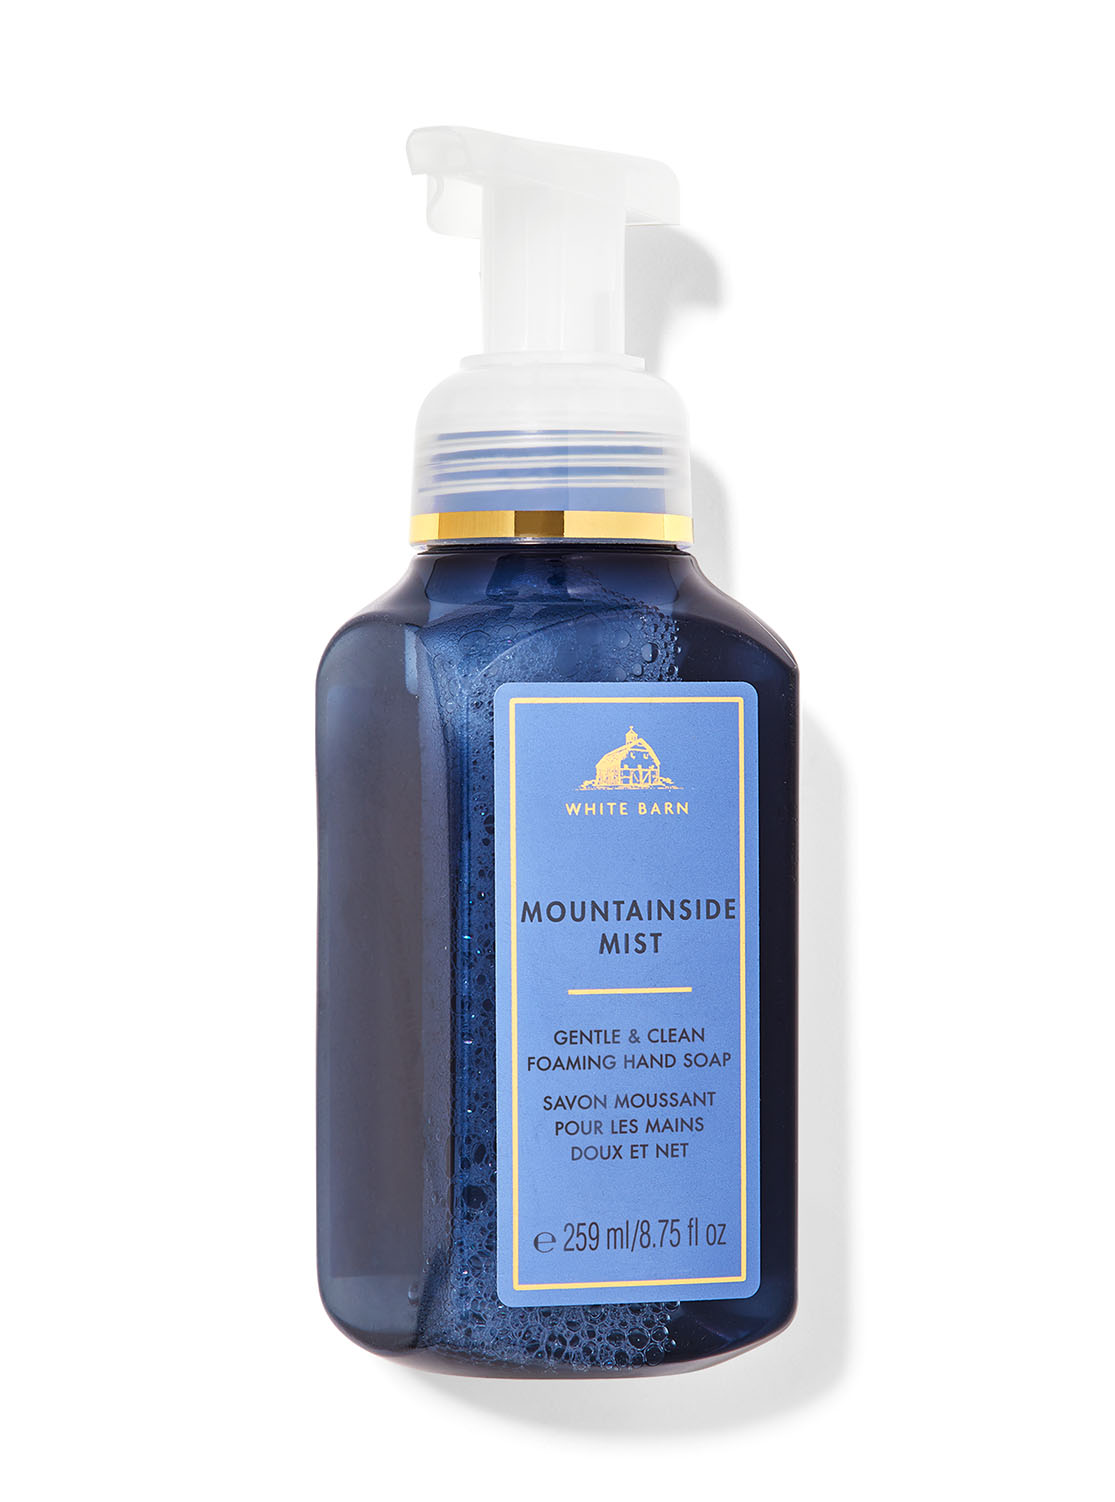 Mountainside Mist Gentle & Clean Foaming Hand Soap | Bath and Body Works